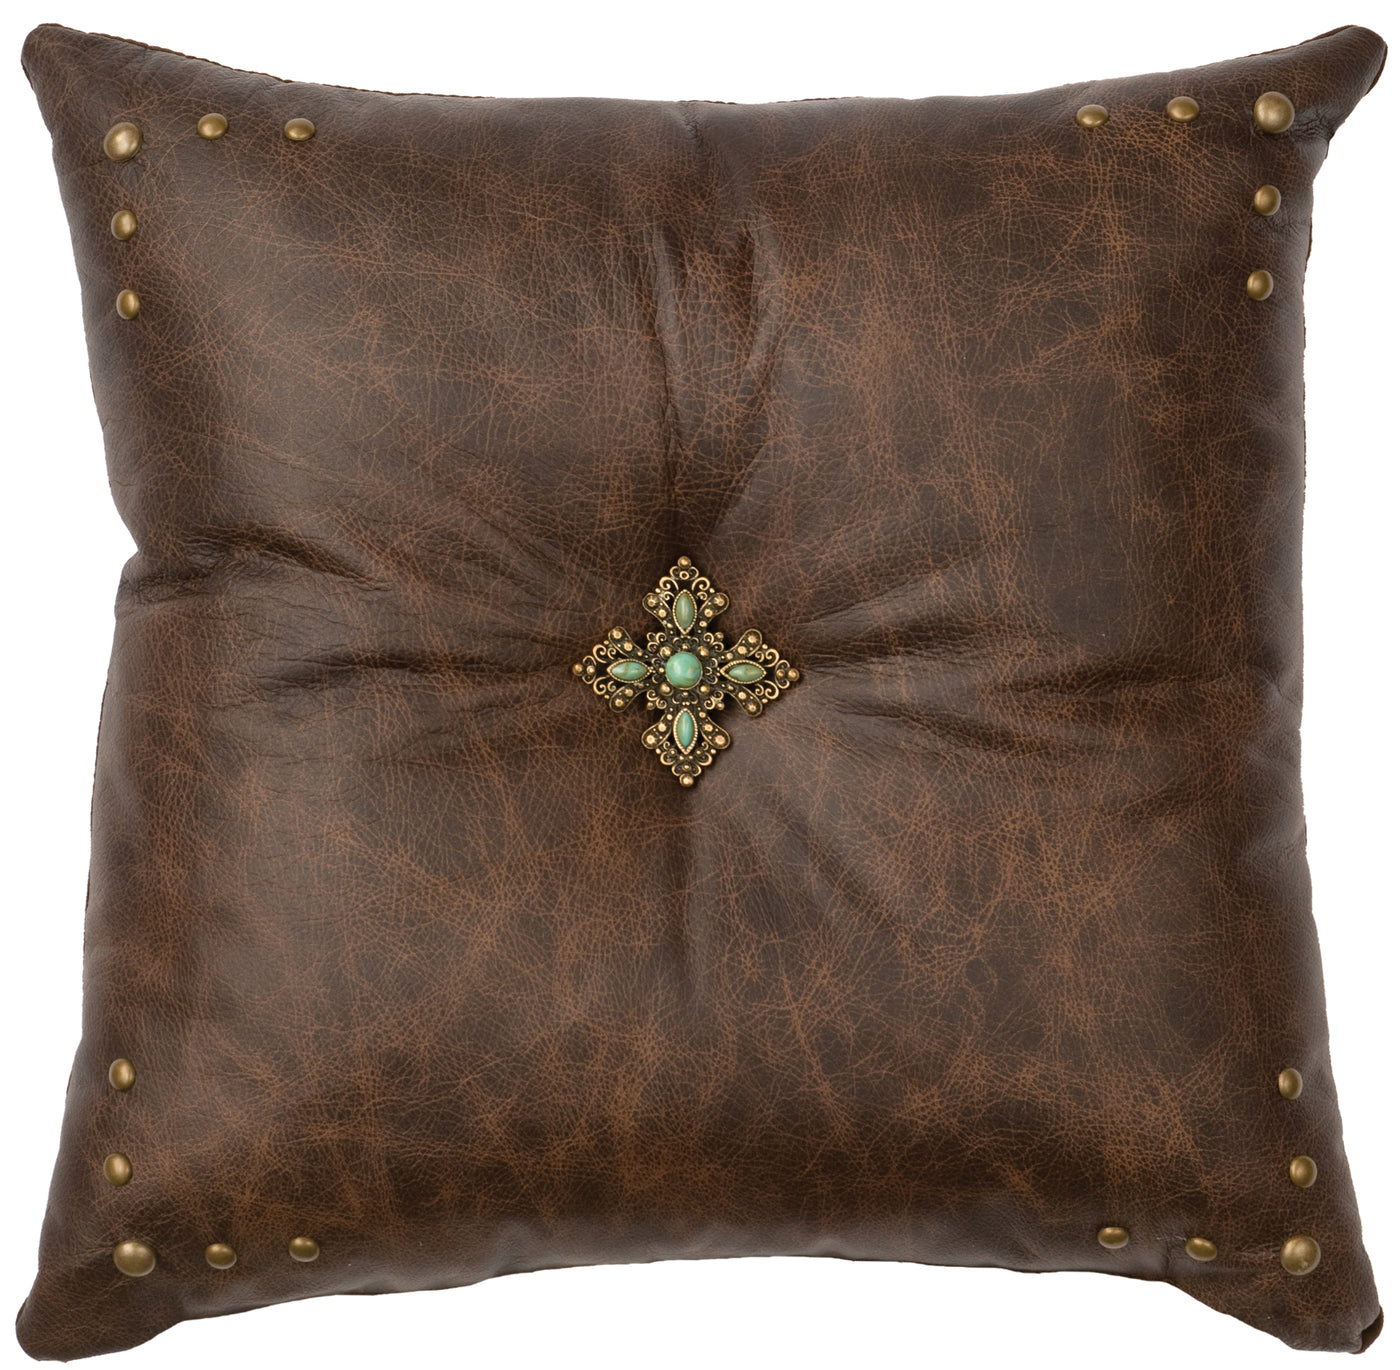 Canvello Texas Leather Pillow - Leather Back - 16" x 16"